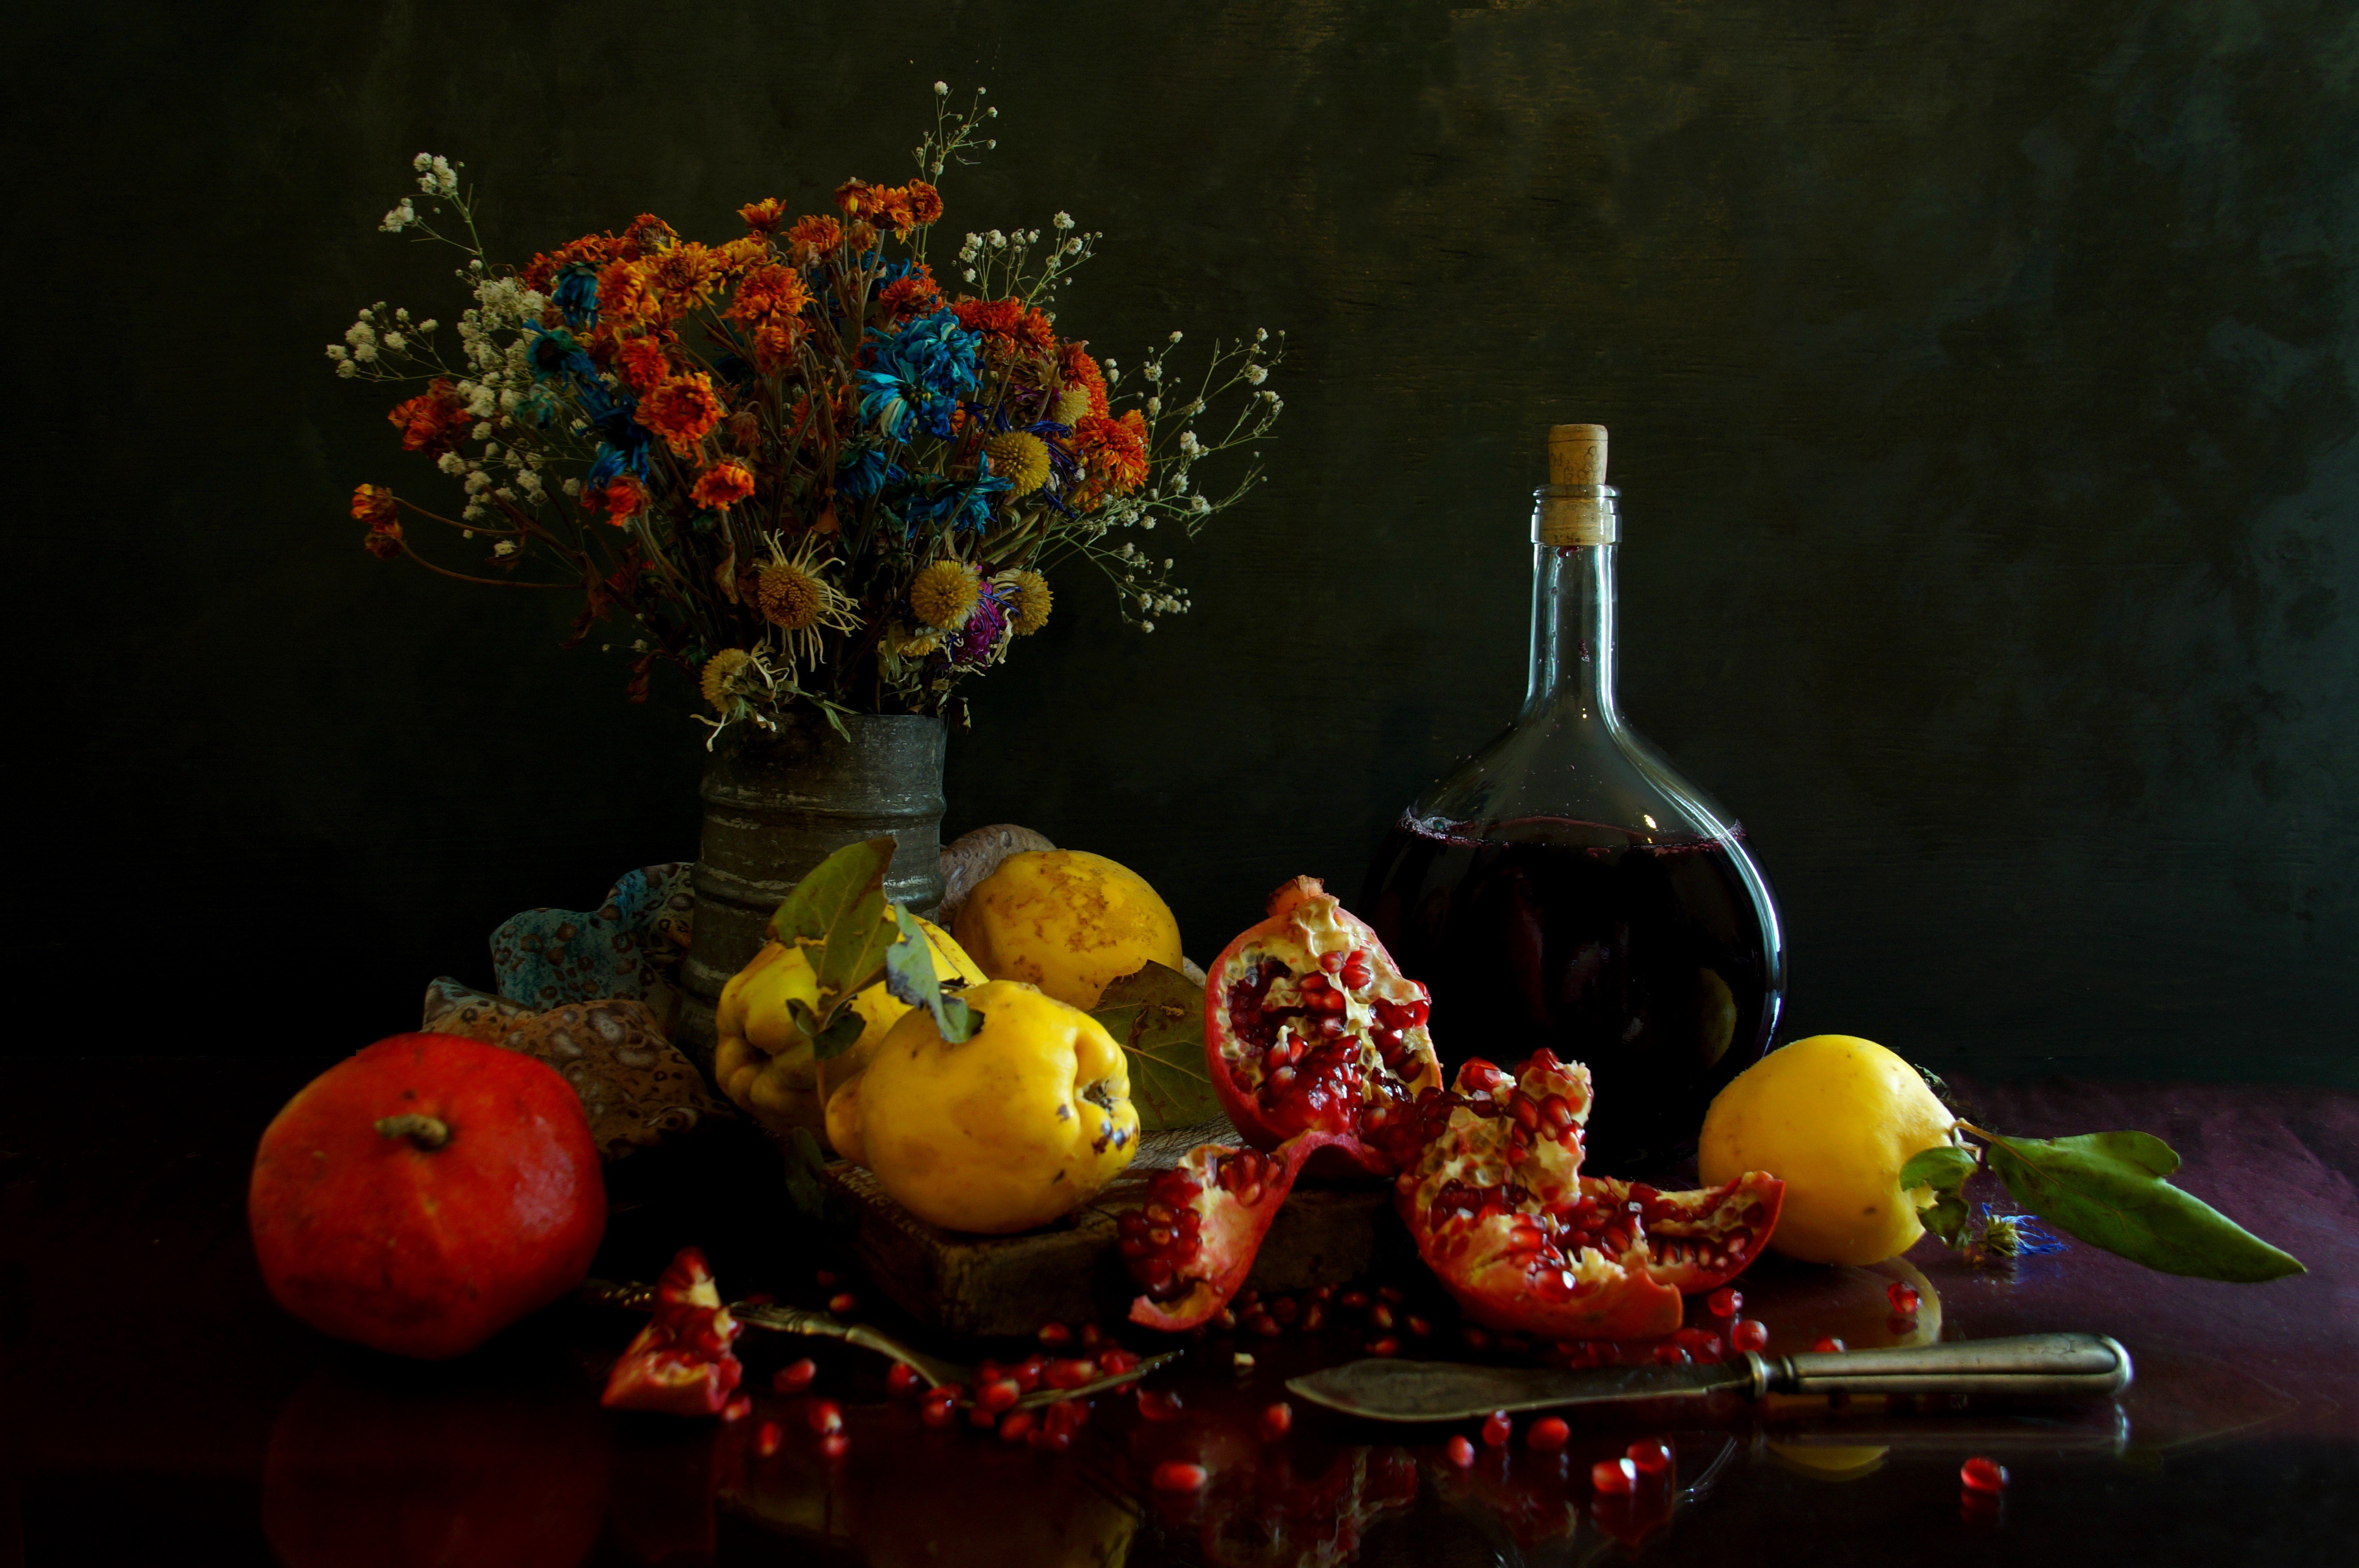 pomegranate and quince, hilmi ayhan